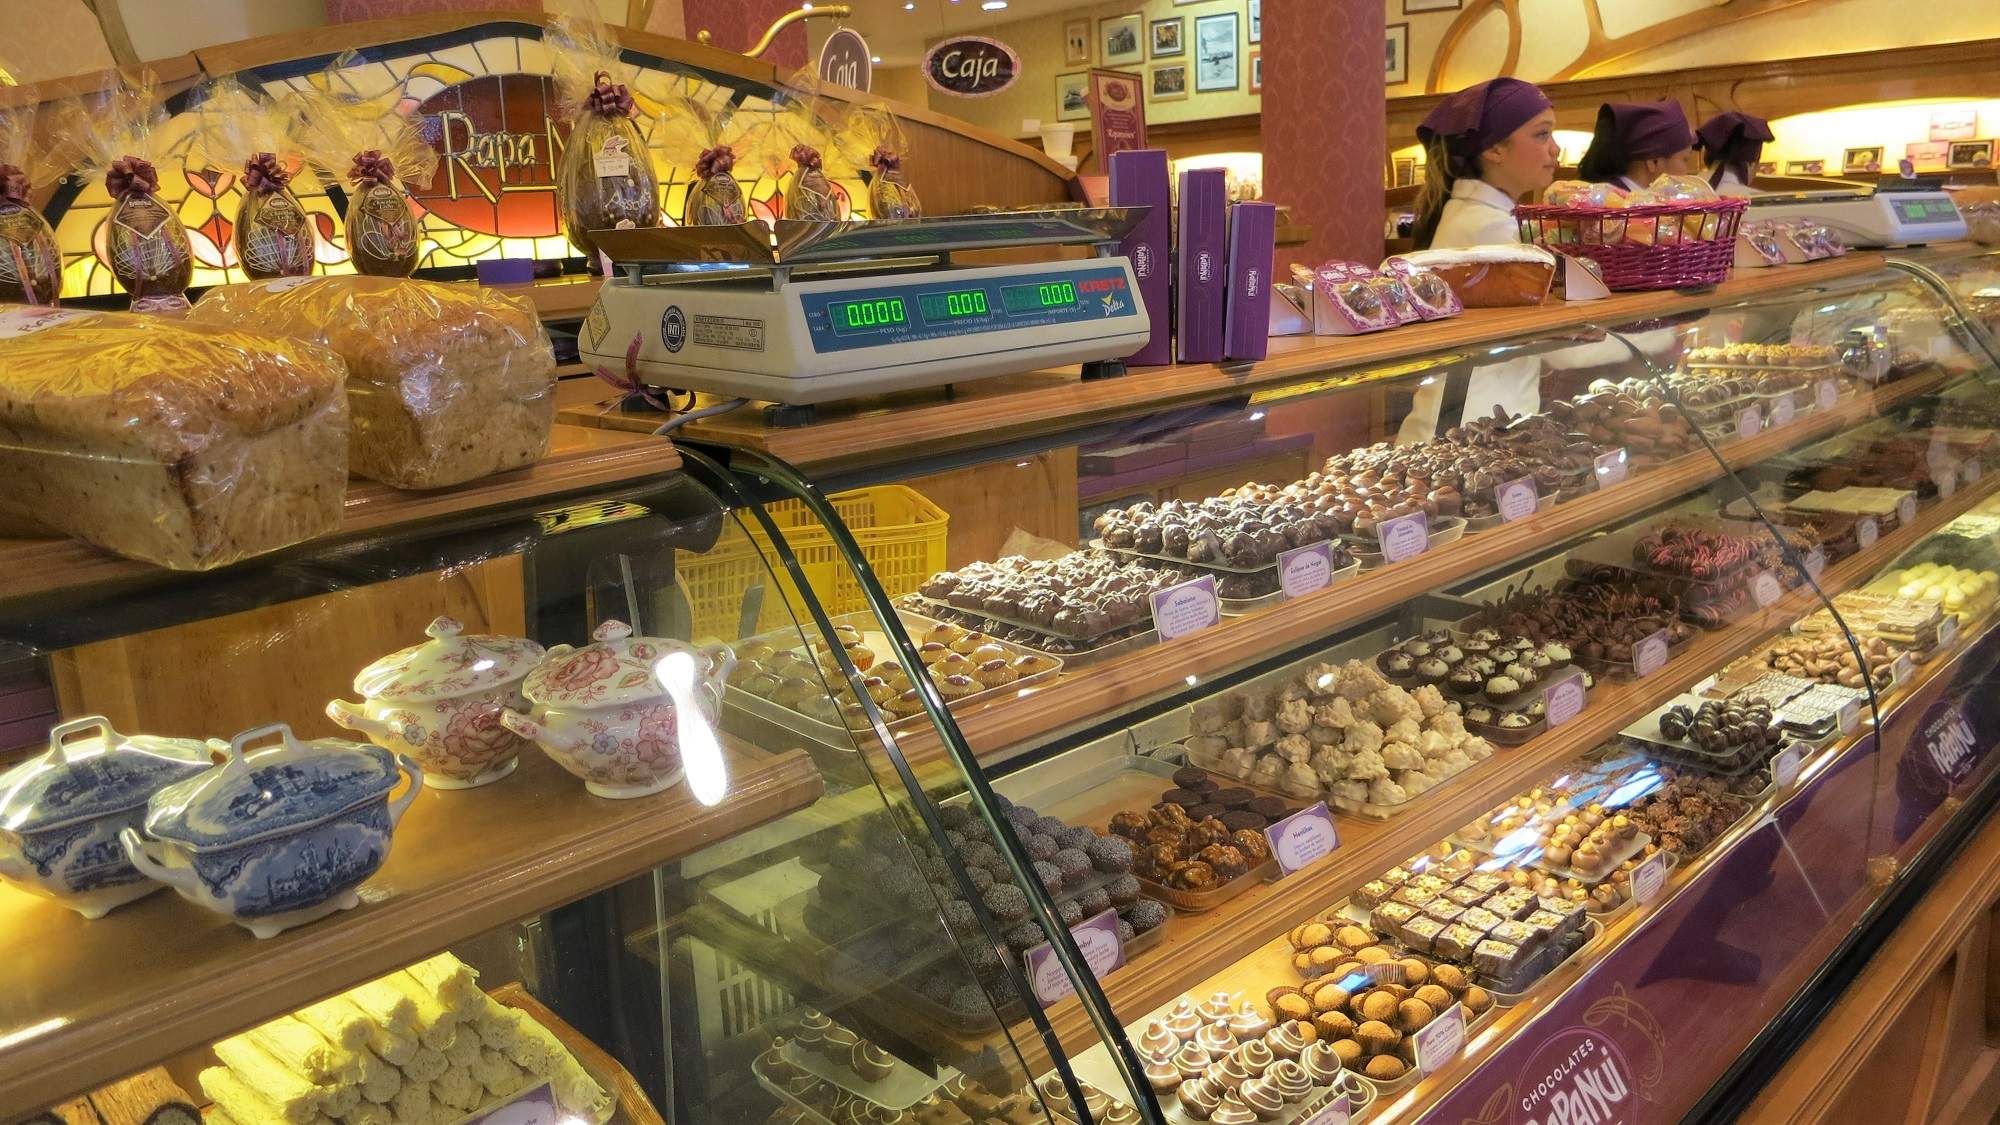 Bariloche is a famous town for its chocolate shops